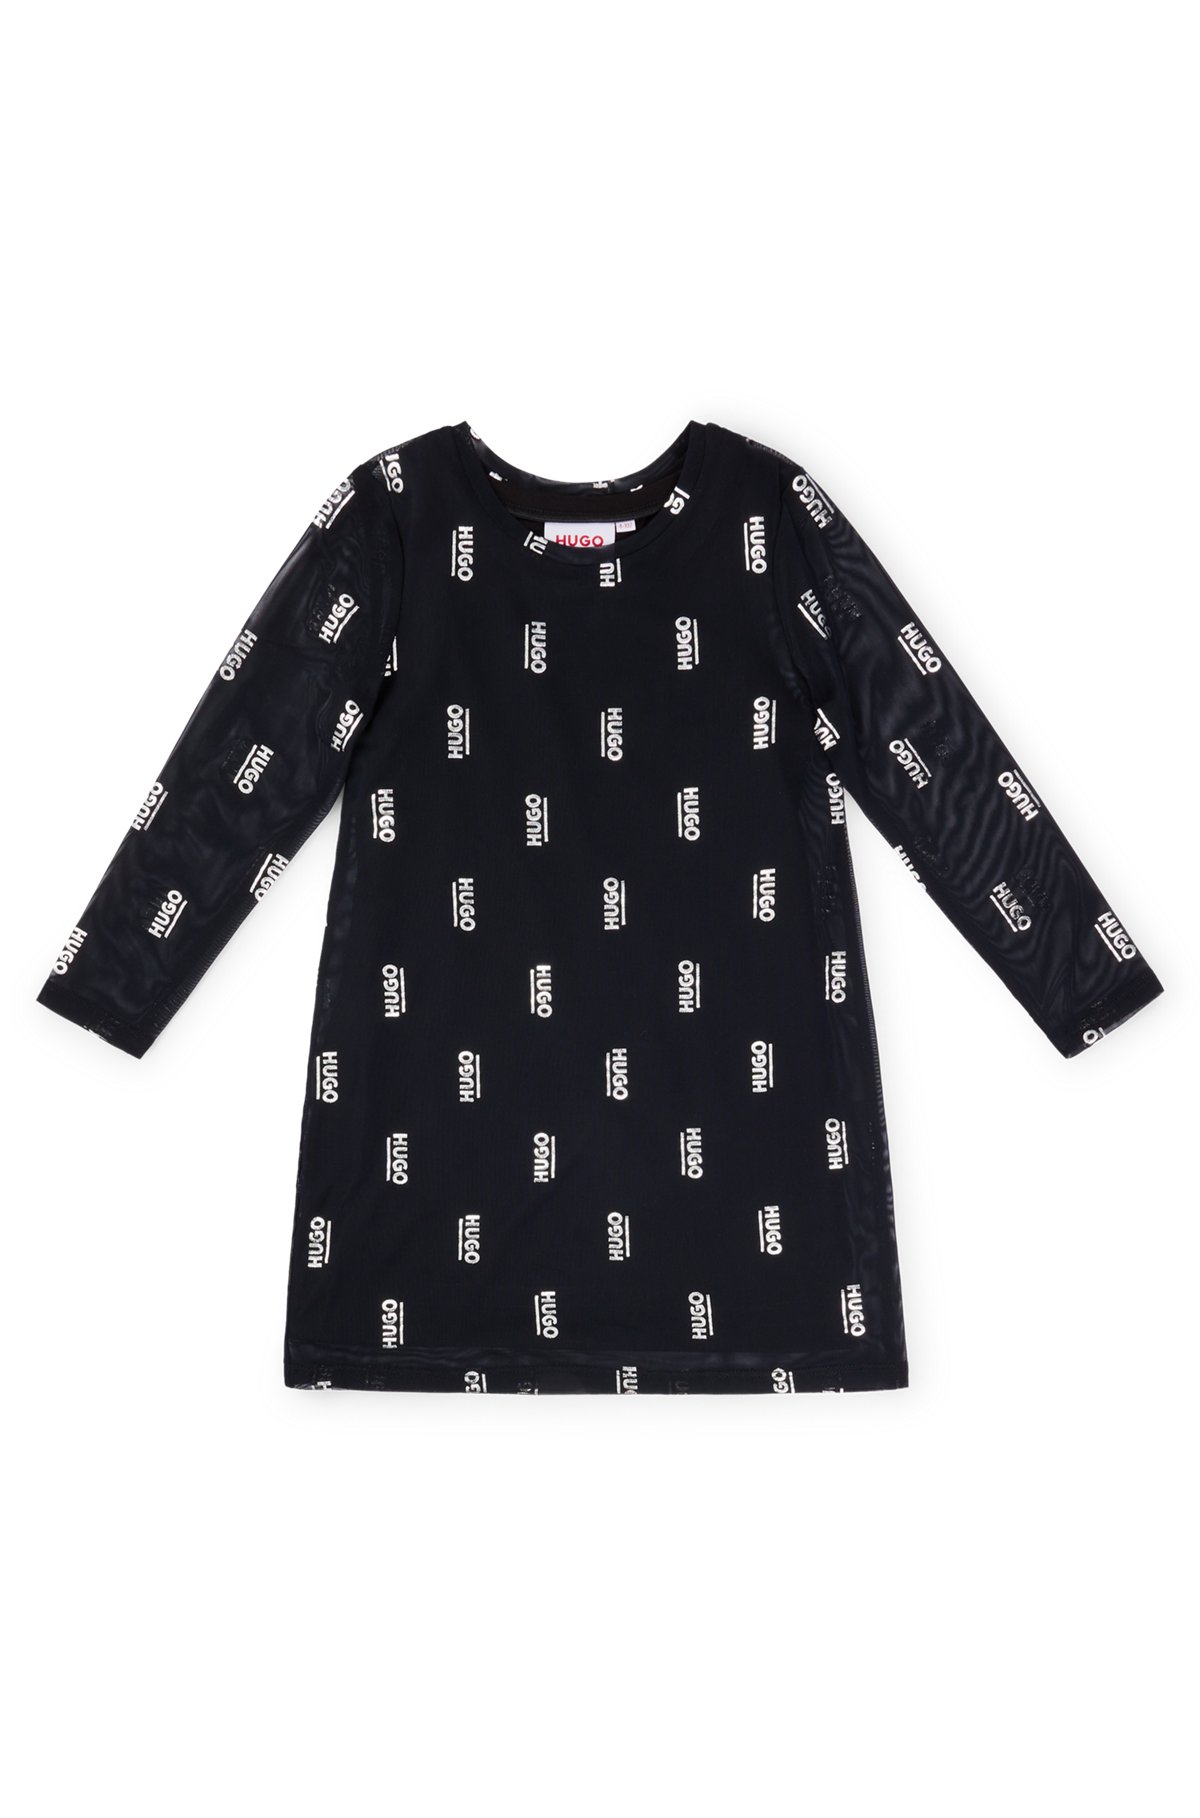 Kids' two-in-one dress with foil-printed logos, Black